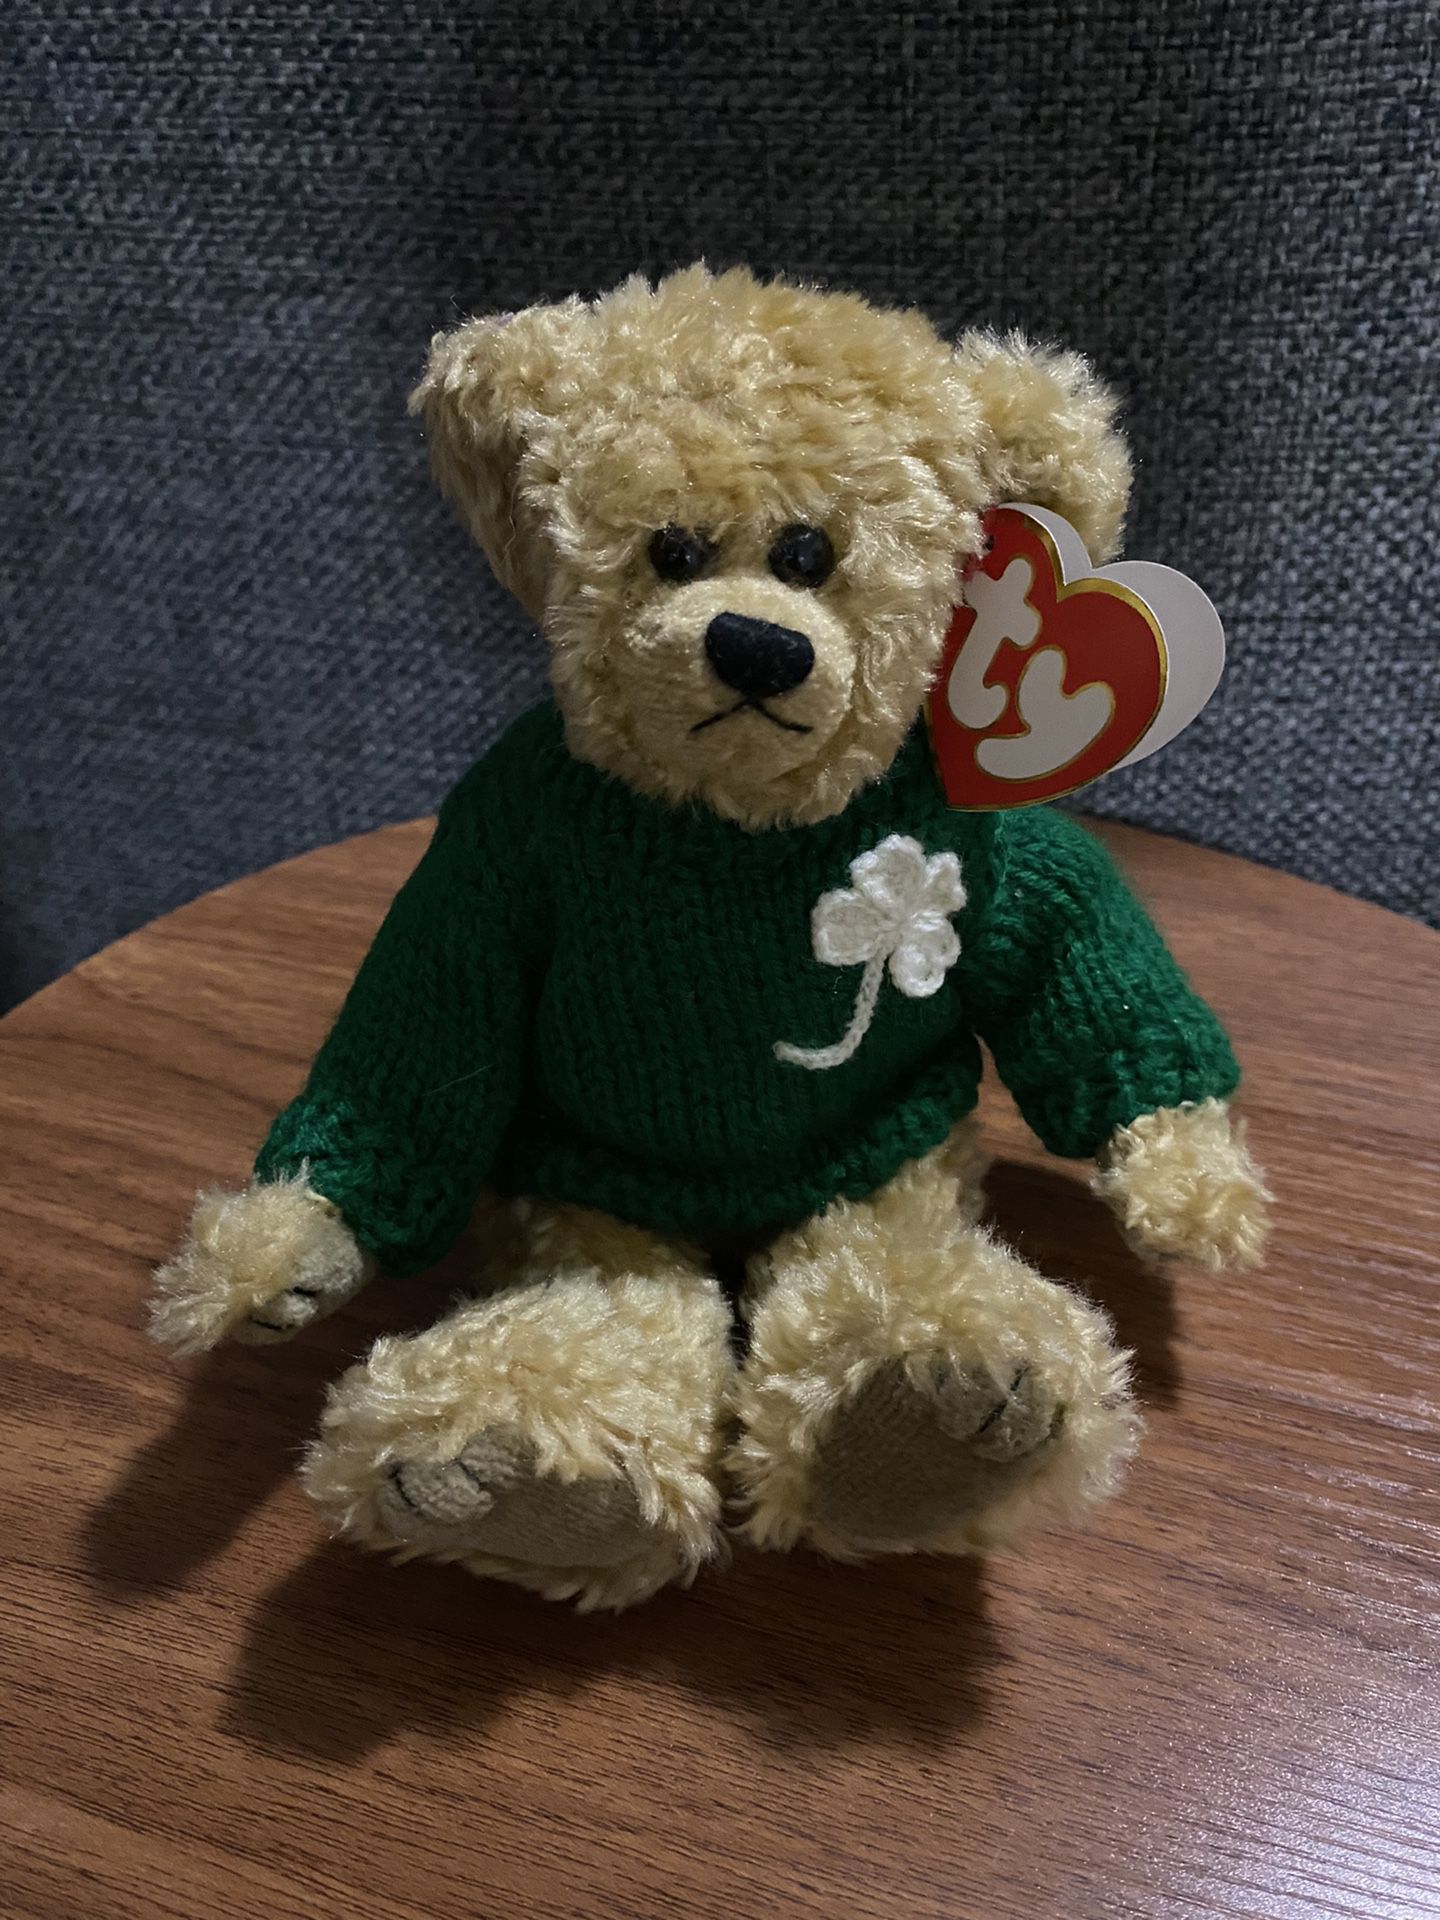 1993 TY Blarney the Bear - The Attic Treasures Collection